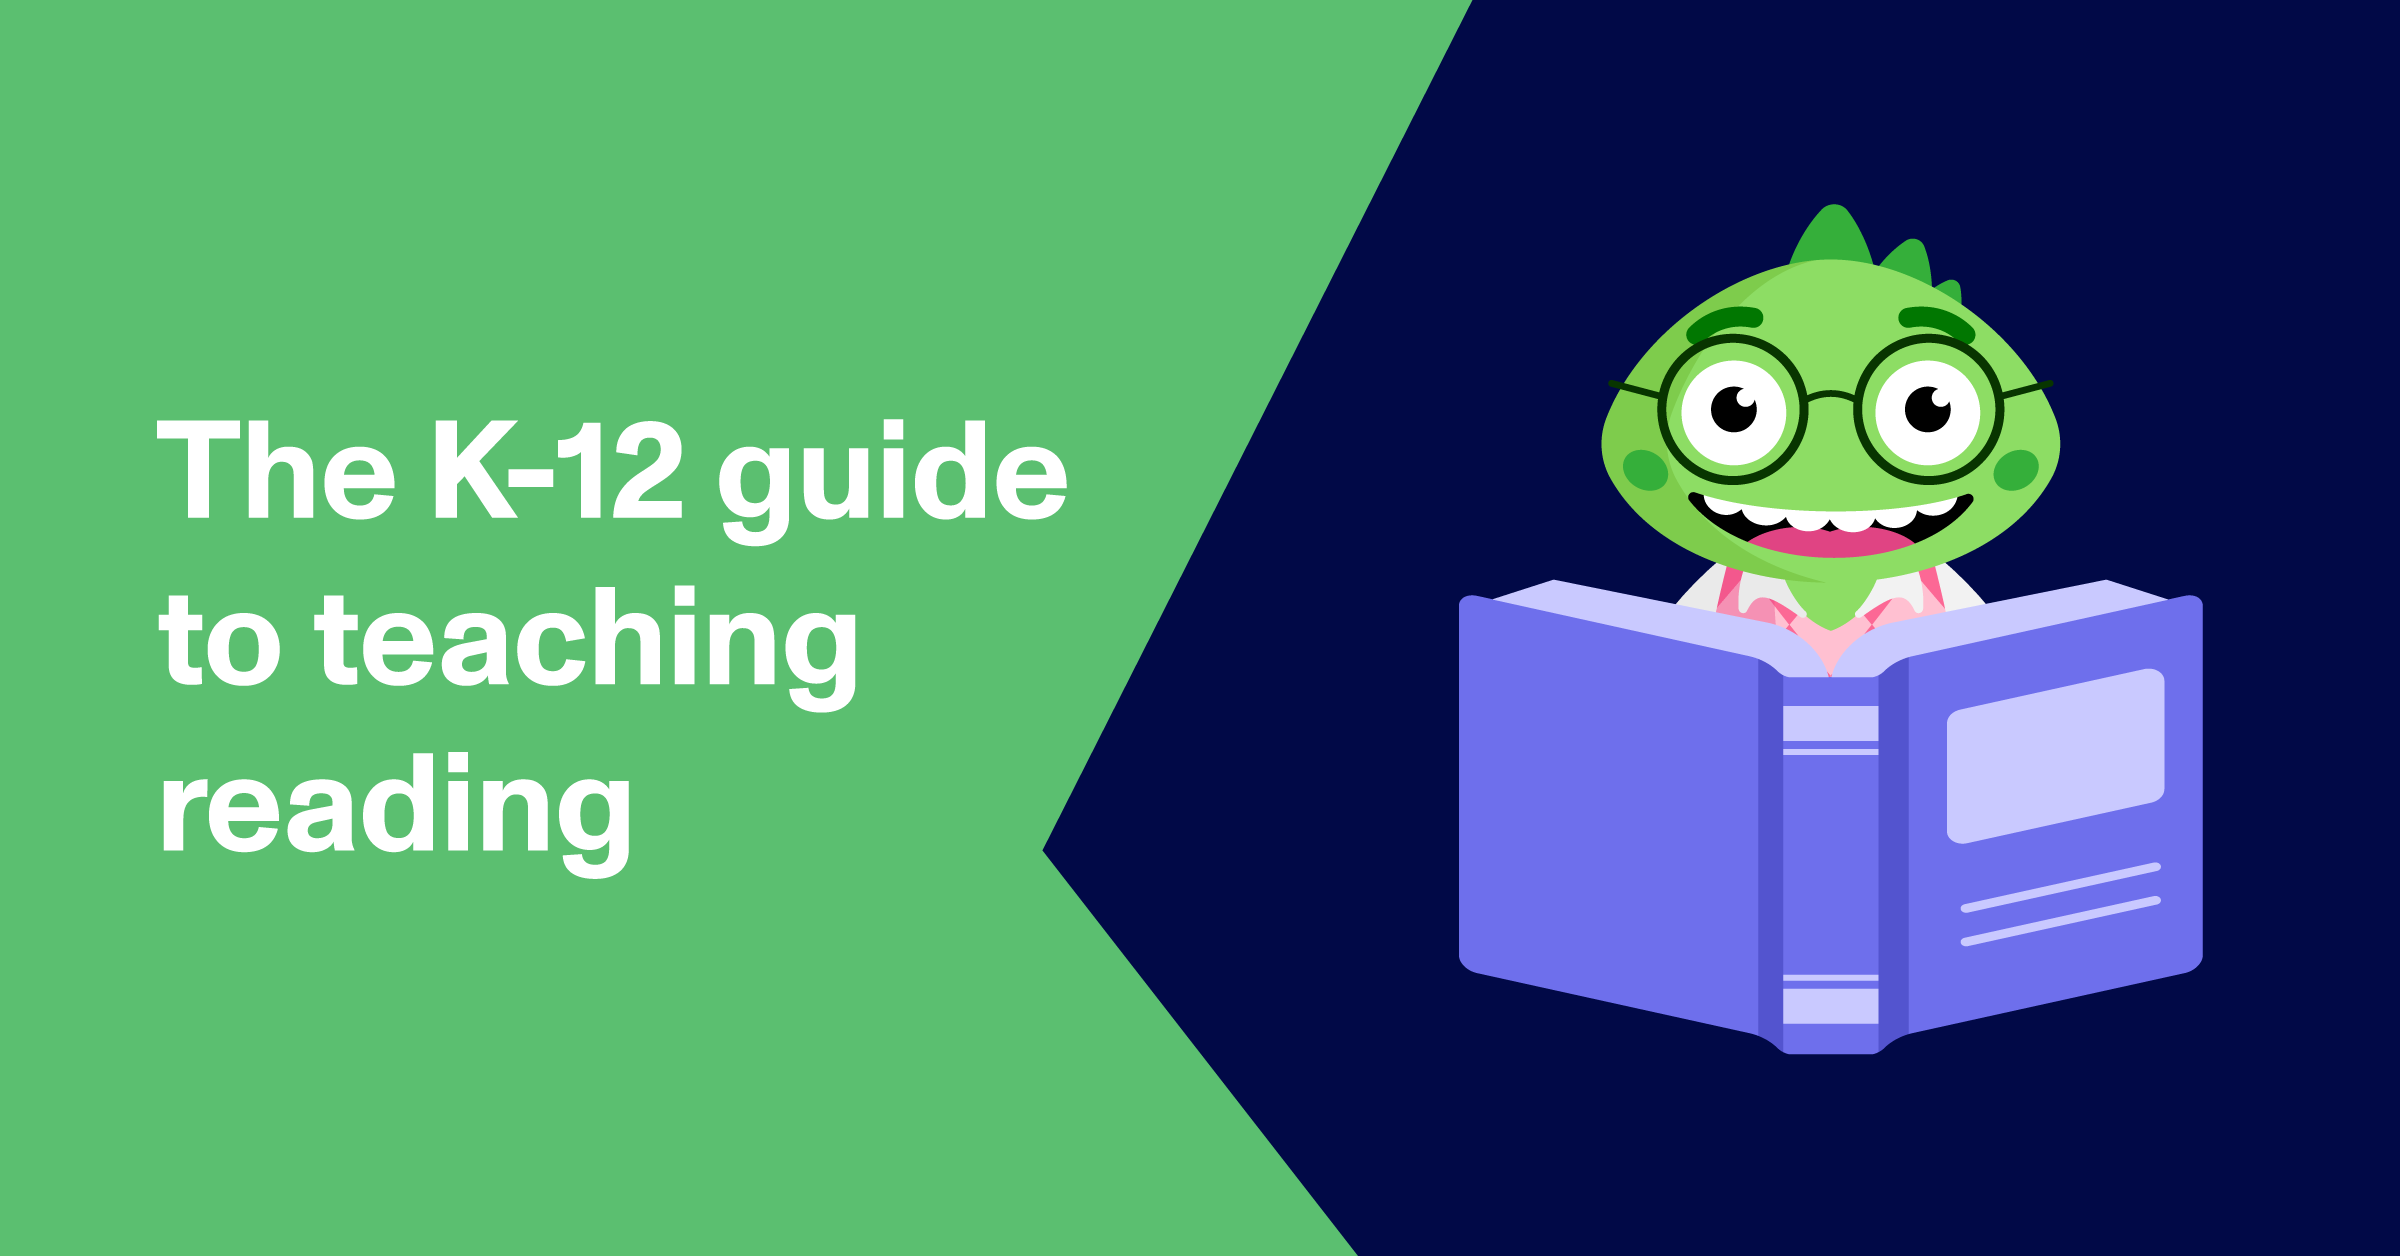 How to teach reading: The K-12 guide